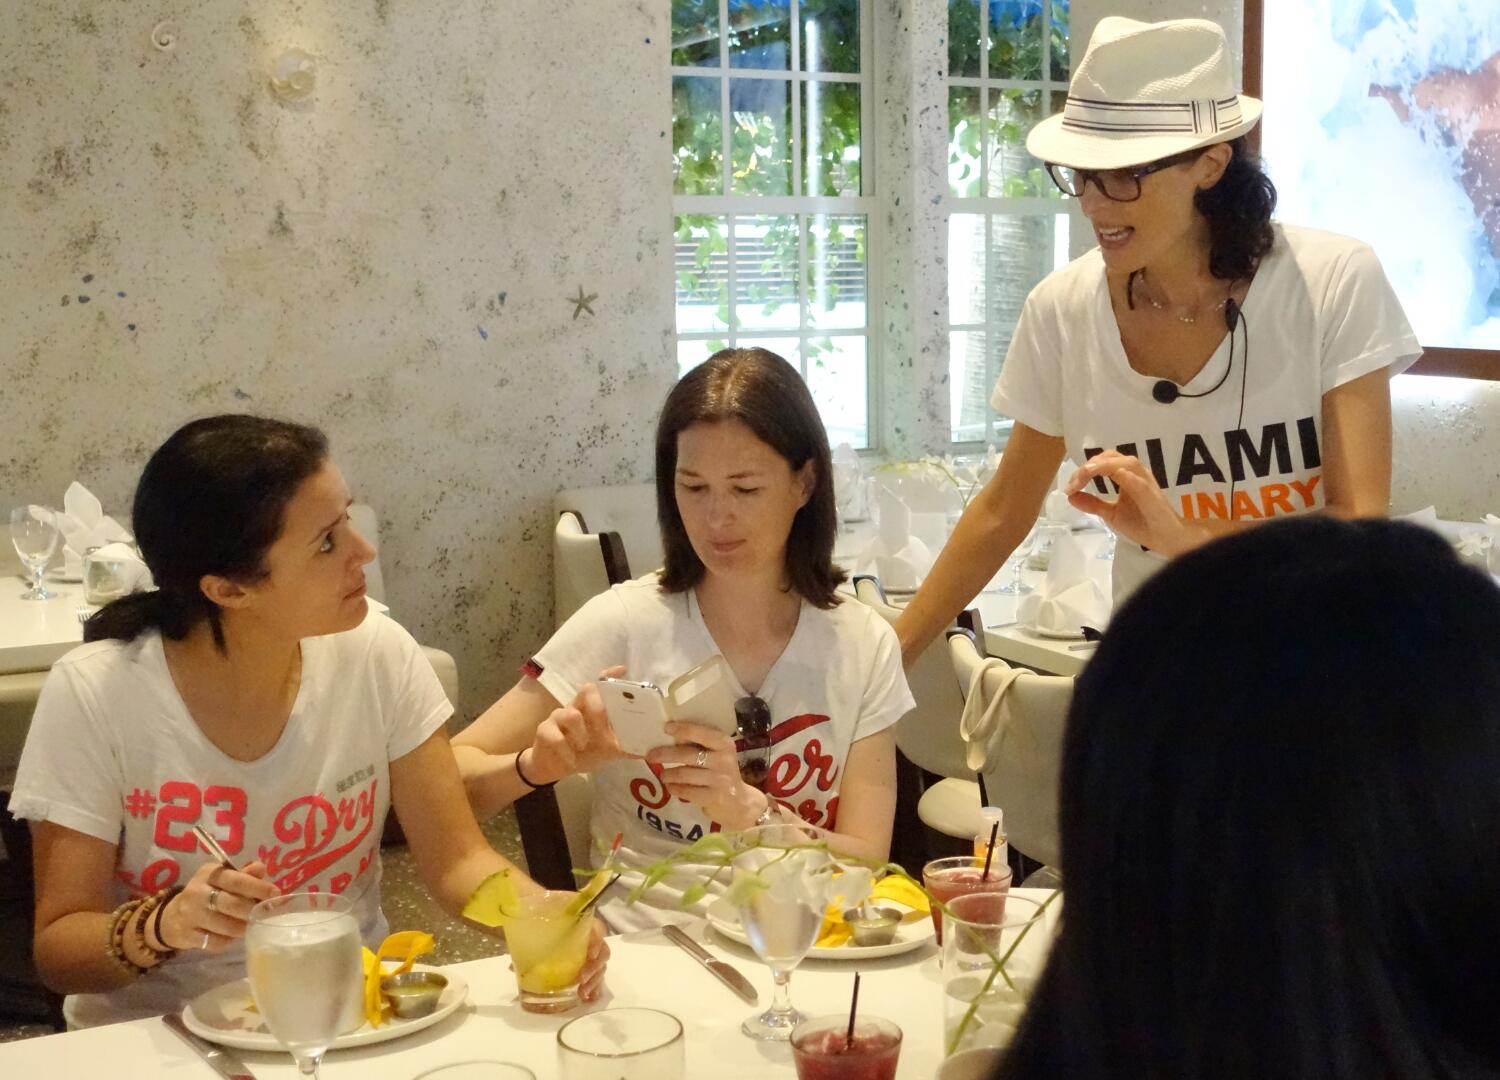 A group of women are sitting at a table enjoying a delicious culinary feast during a private Miami food tour.